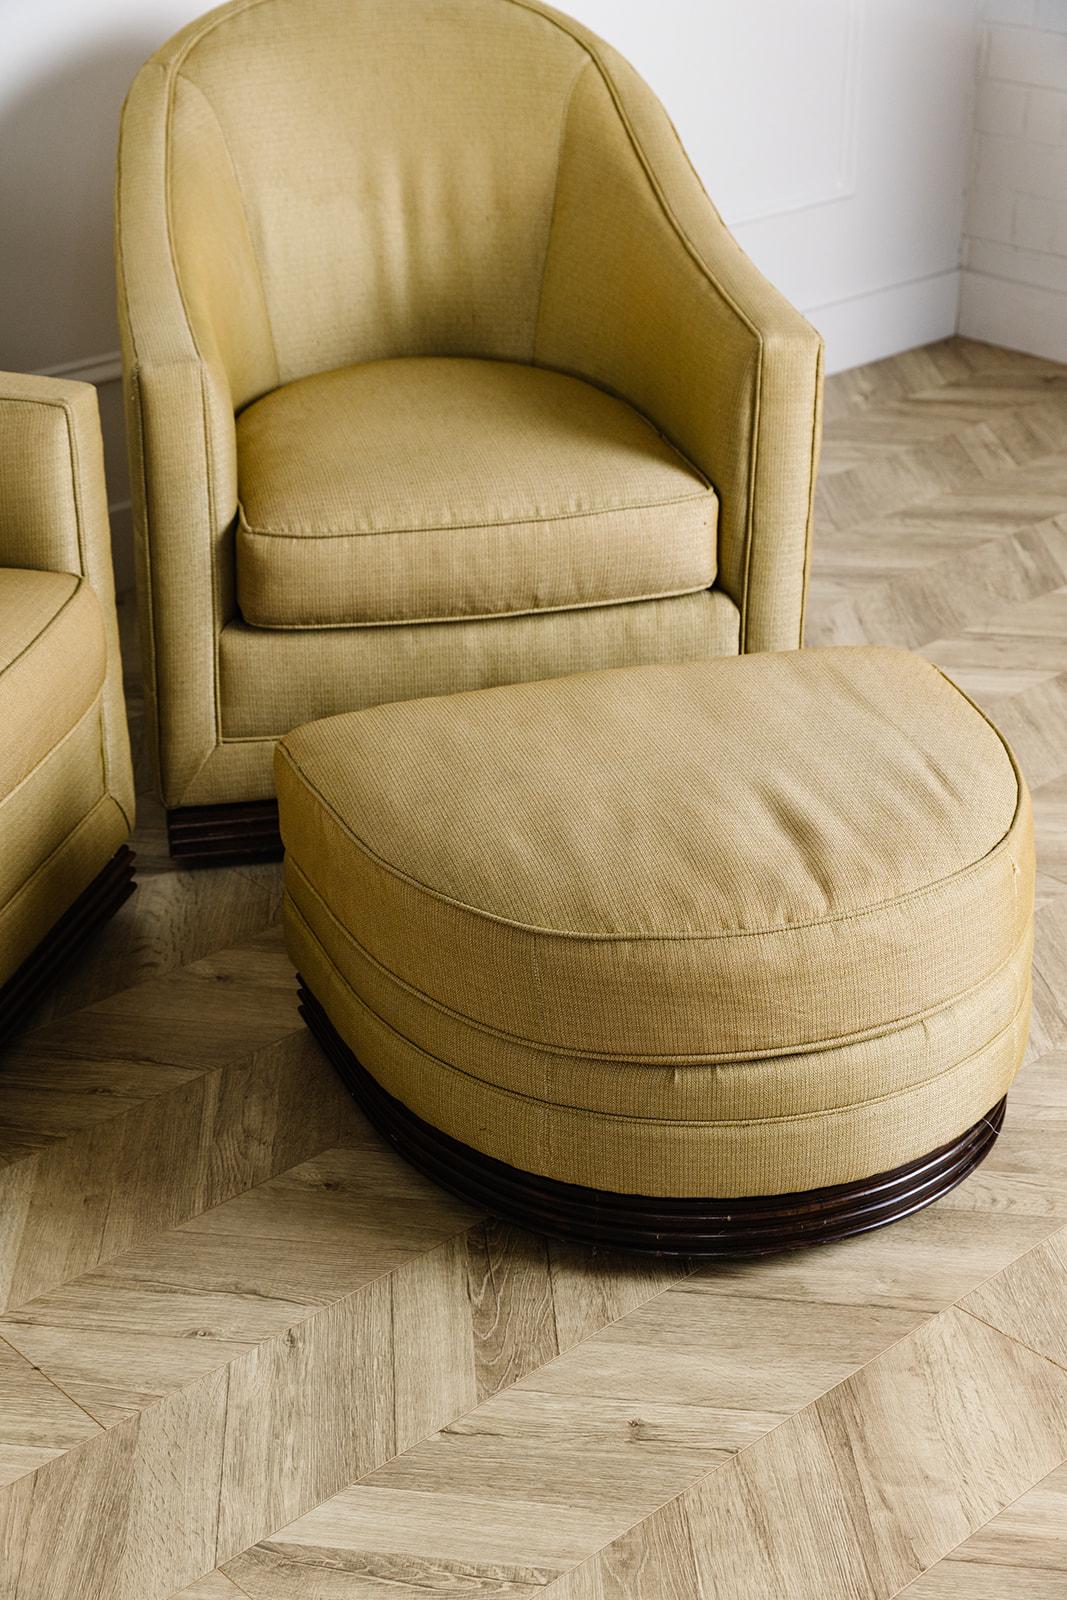 Pair of vintage swivel chairs with rattan bases and a muted gold upholstery. The pair comes with a single matching ottoman. The fabric is in amazing condition and does not need to be redone. The swivel mechanisms work great. These chairs are deep